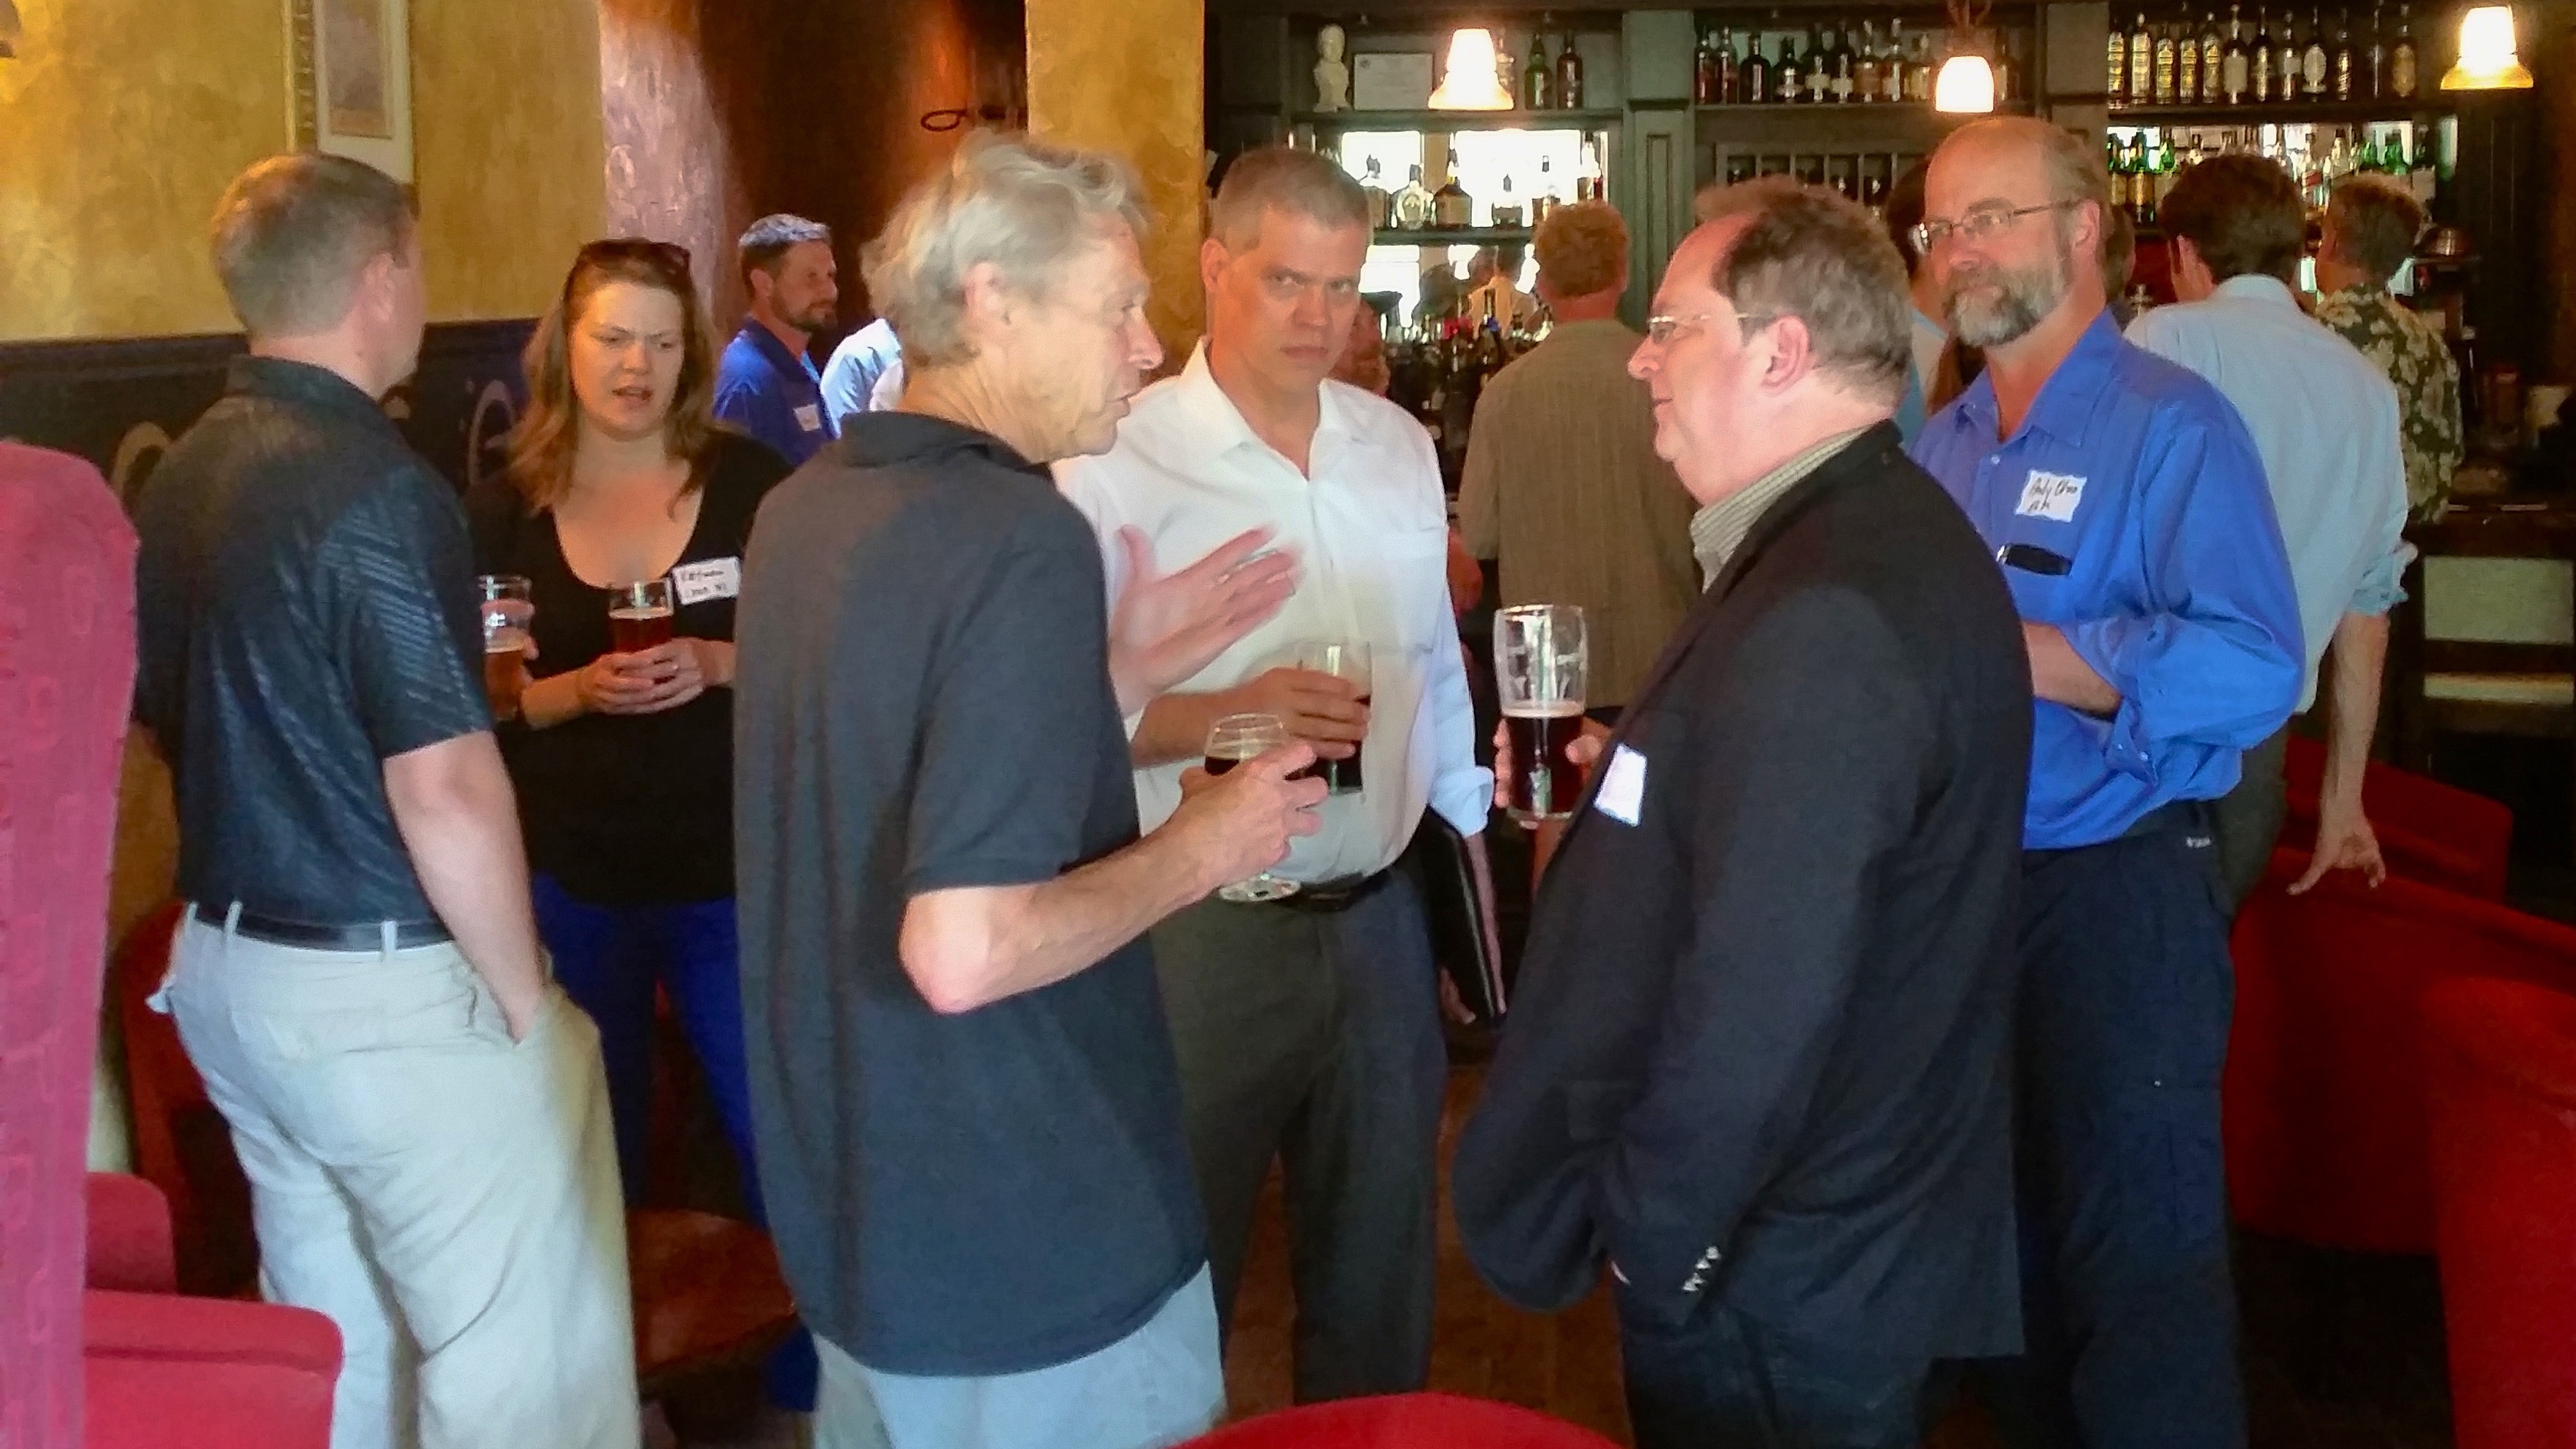 CEBN members network after a policy briefing in Madison, Wisconsin (July 10, 2014).